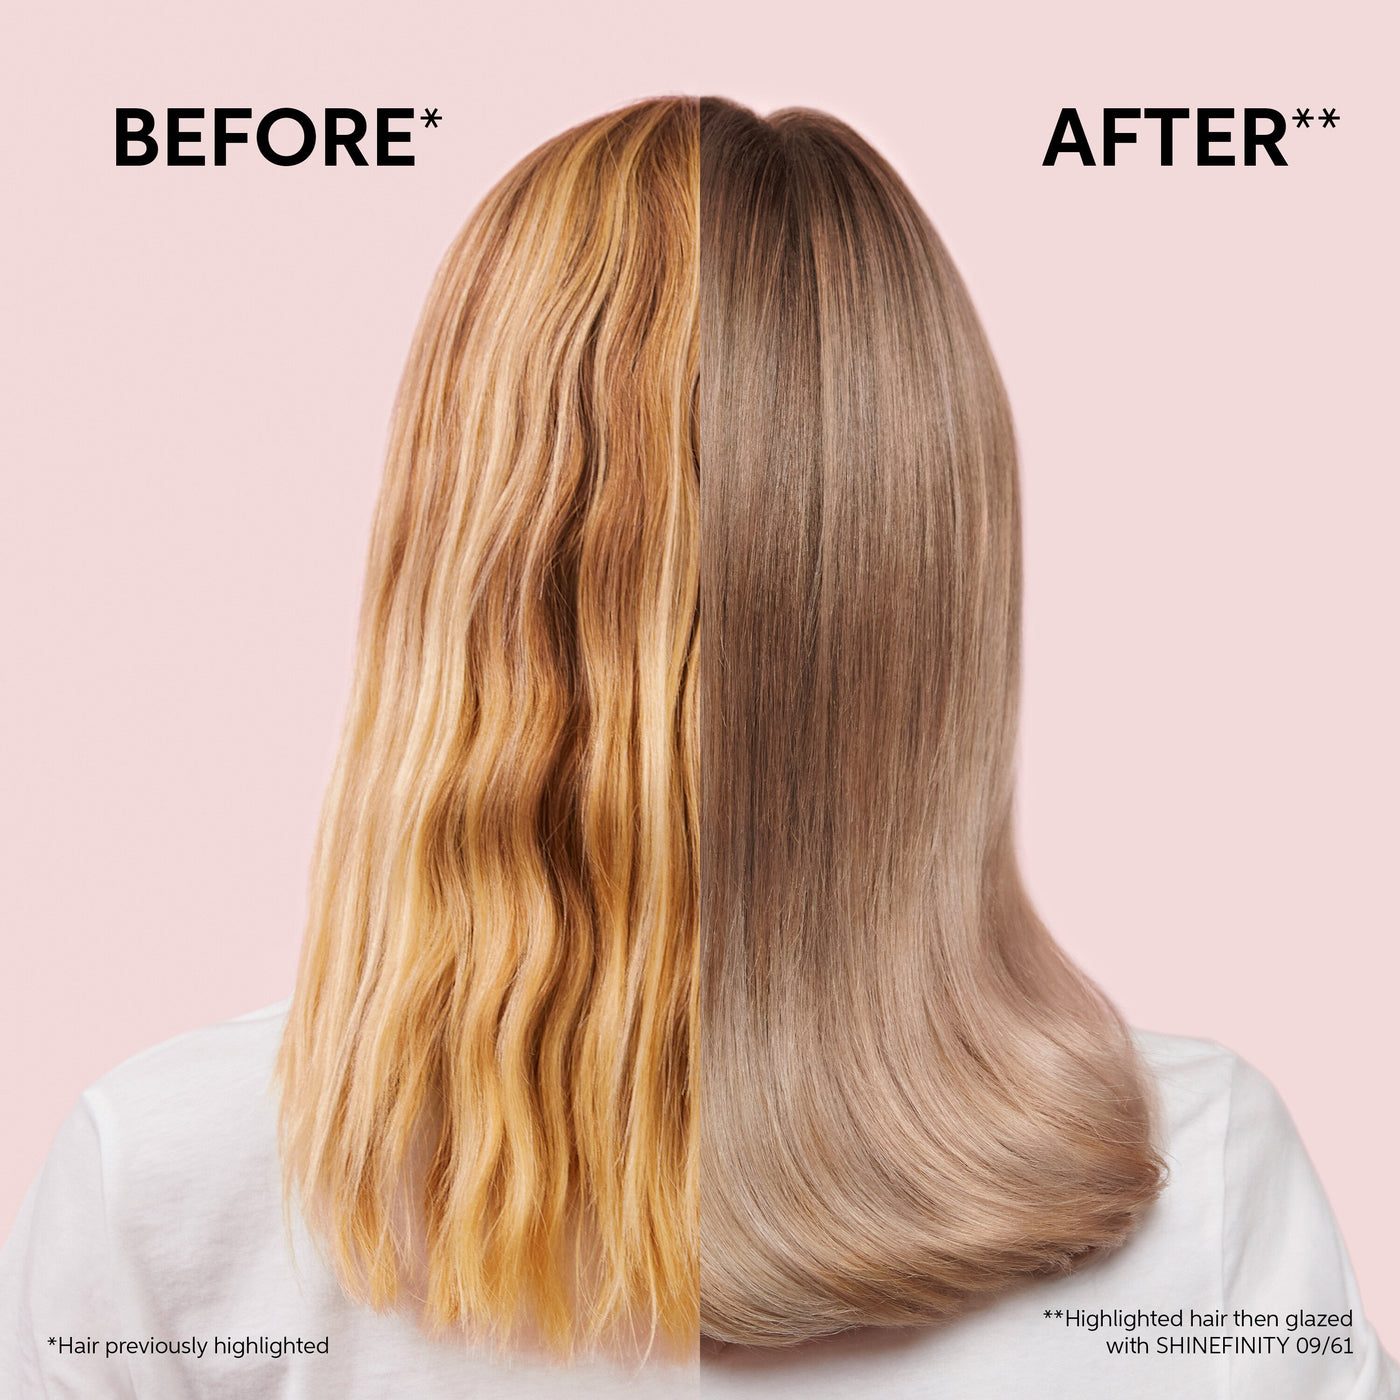 Wella Professionals Shinefinity Zero Lift Glaze Demi-Permanent Hair Colour (60ml) before and after